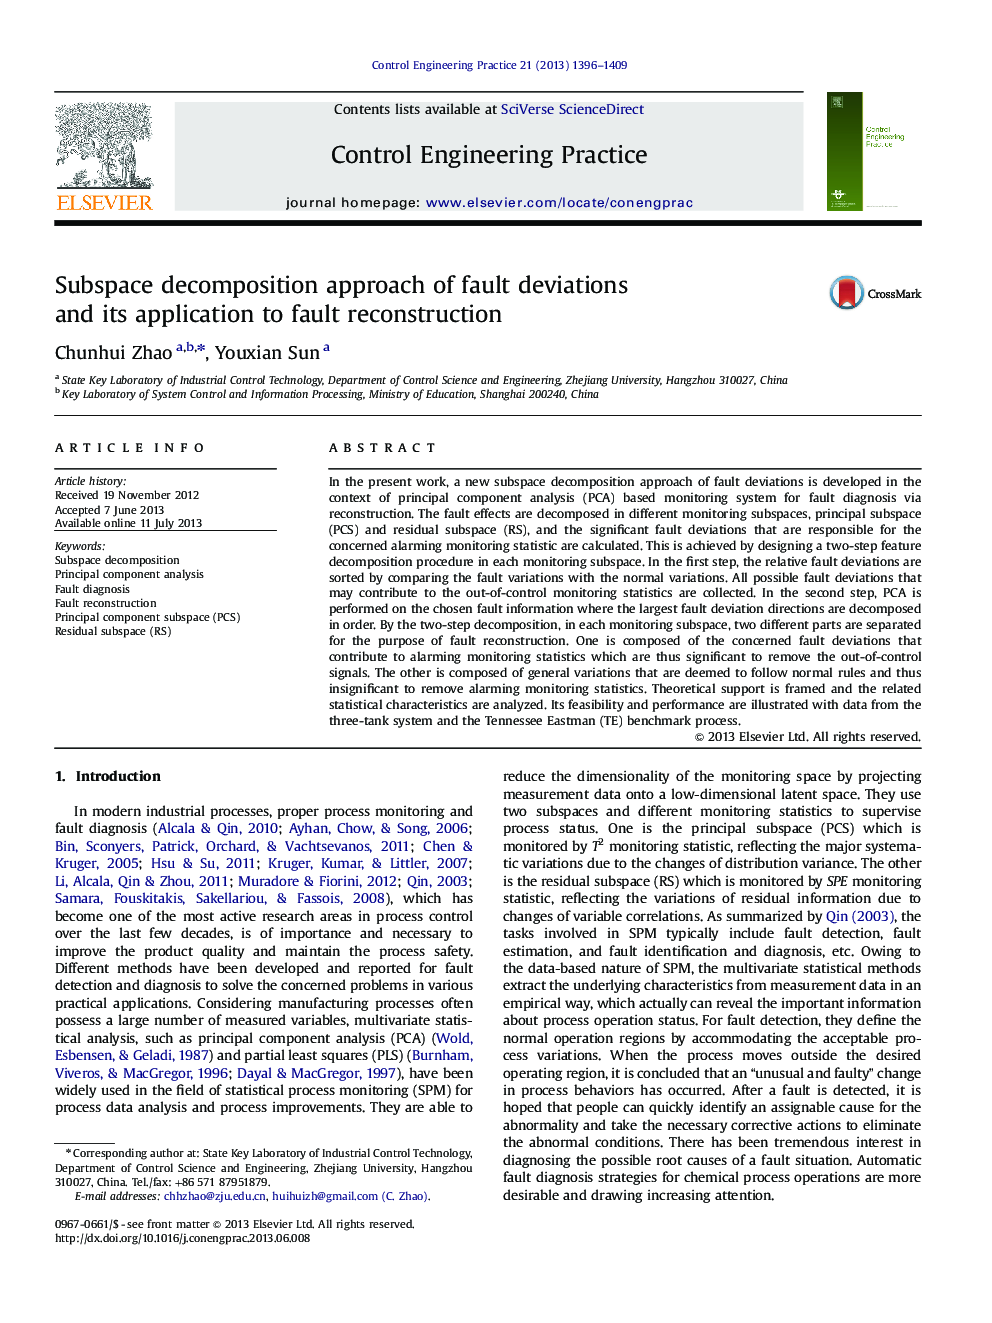 Subspace decomposition approach of fault deviations and its application to fault reconstruction